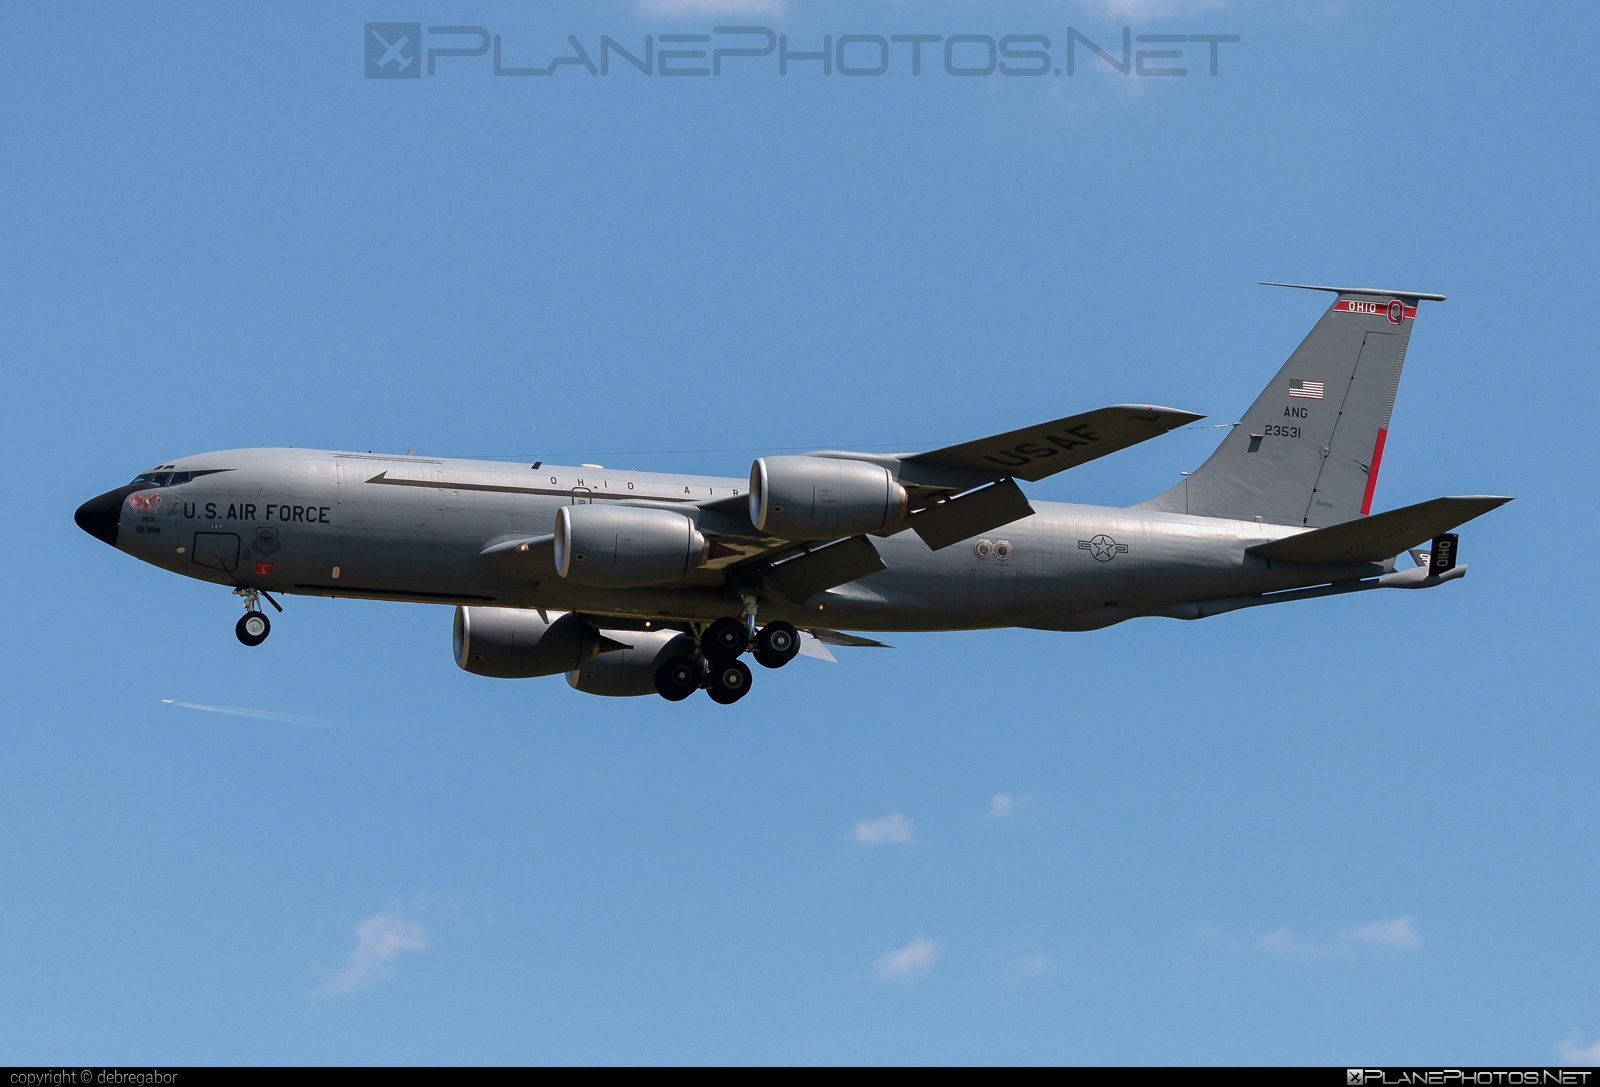 Boeing KC-135R Stratotanker - 62-3531 operated by US Air Force (USAF) #boeing #kc135 #kc135r #kc135stratotanker #stratotanker #usaf #usairforce